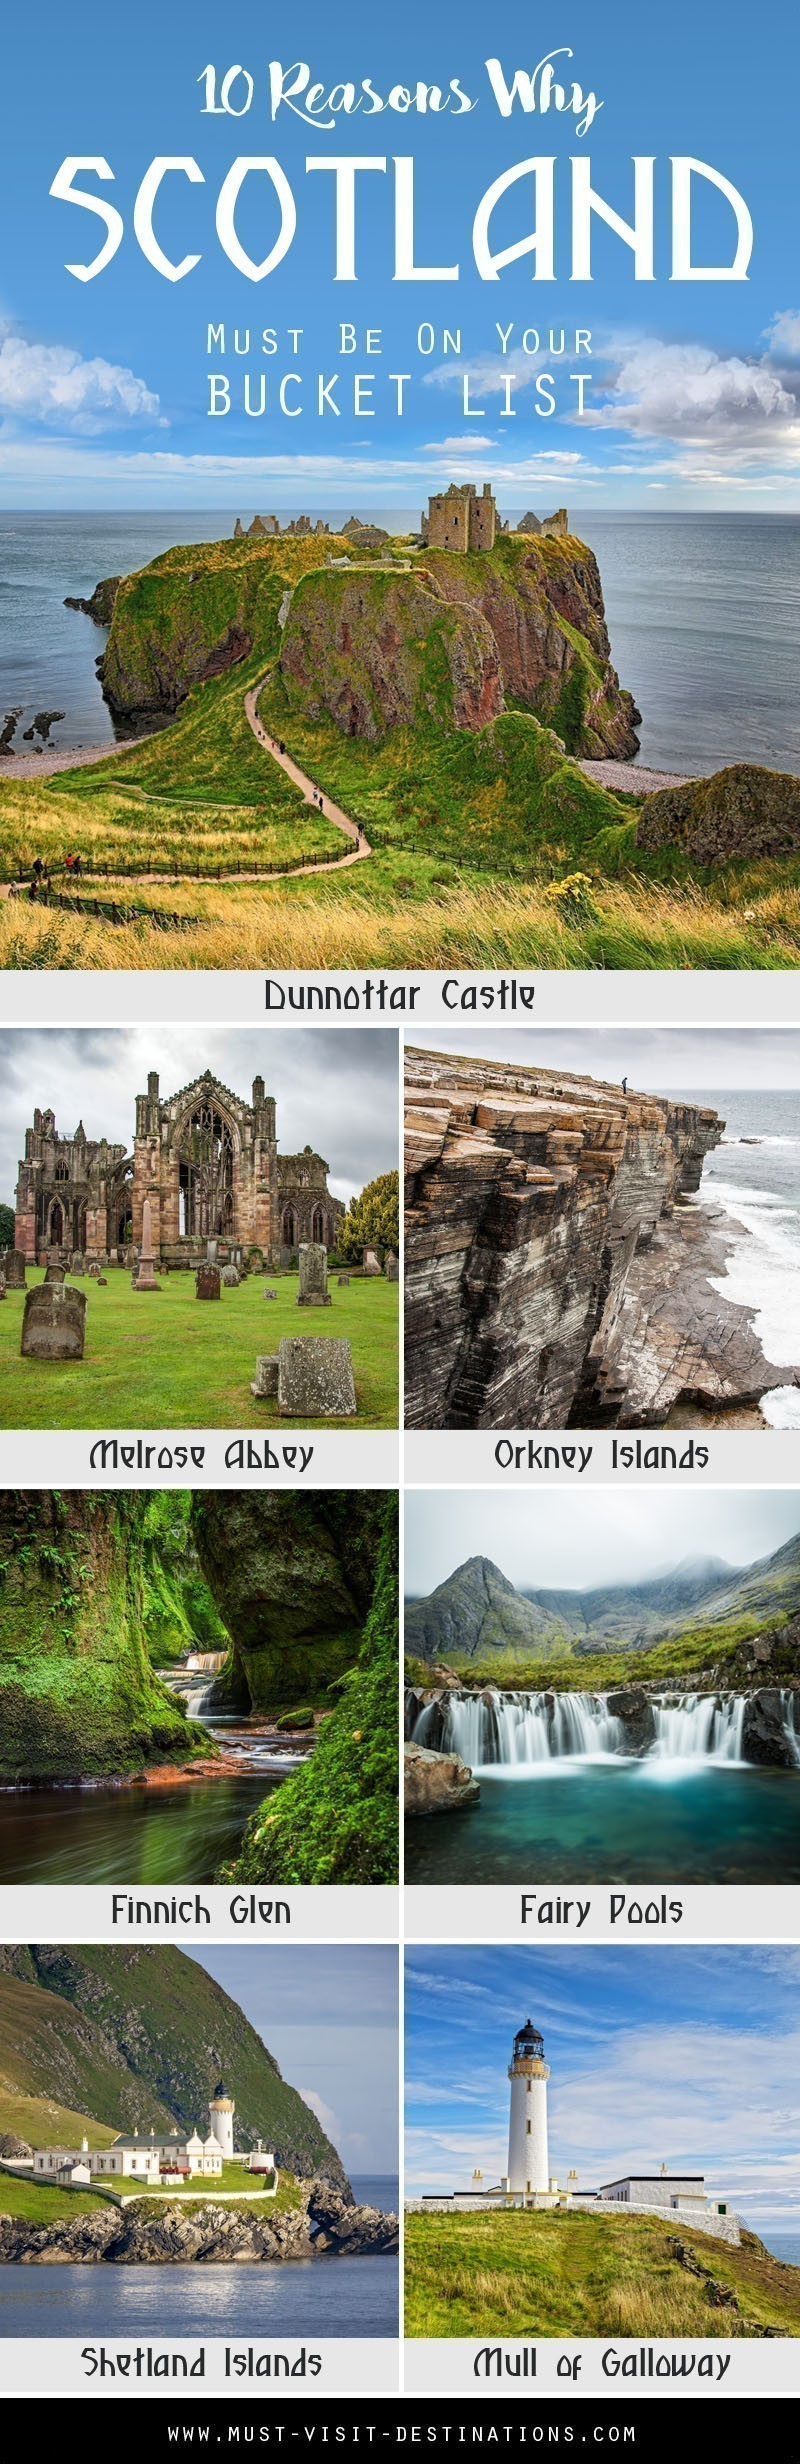 Are you wondering which travel destination you should visit this year? Here are 10 Reasons Why Scotland Must Be On Your Bucket List.#Scotland #Travel #Europe